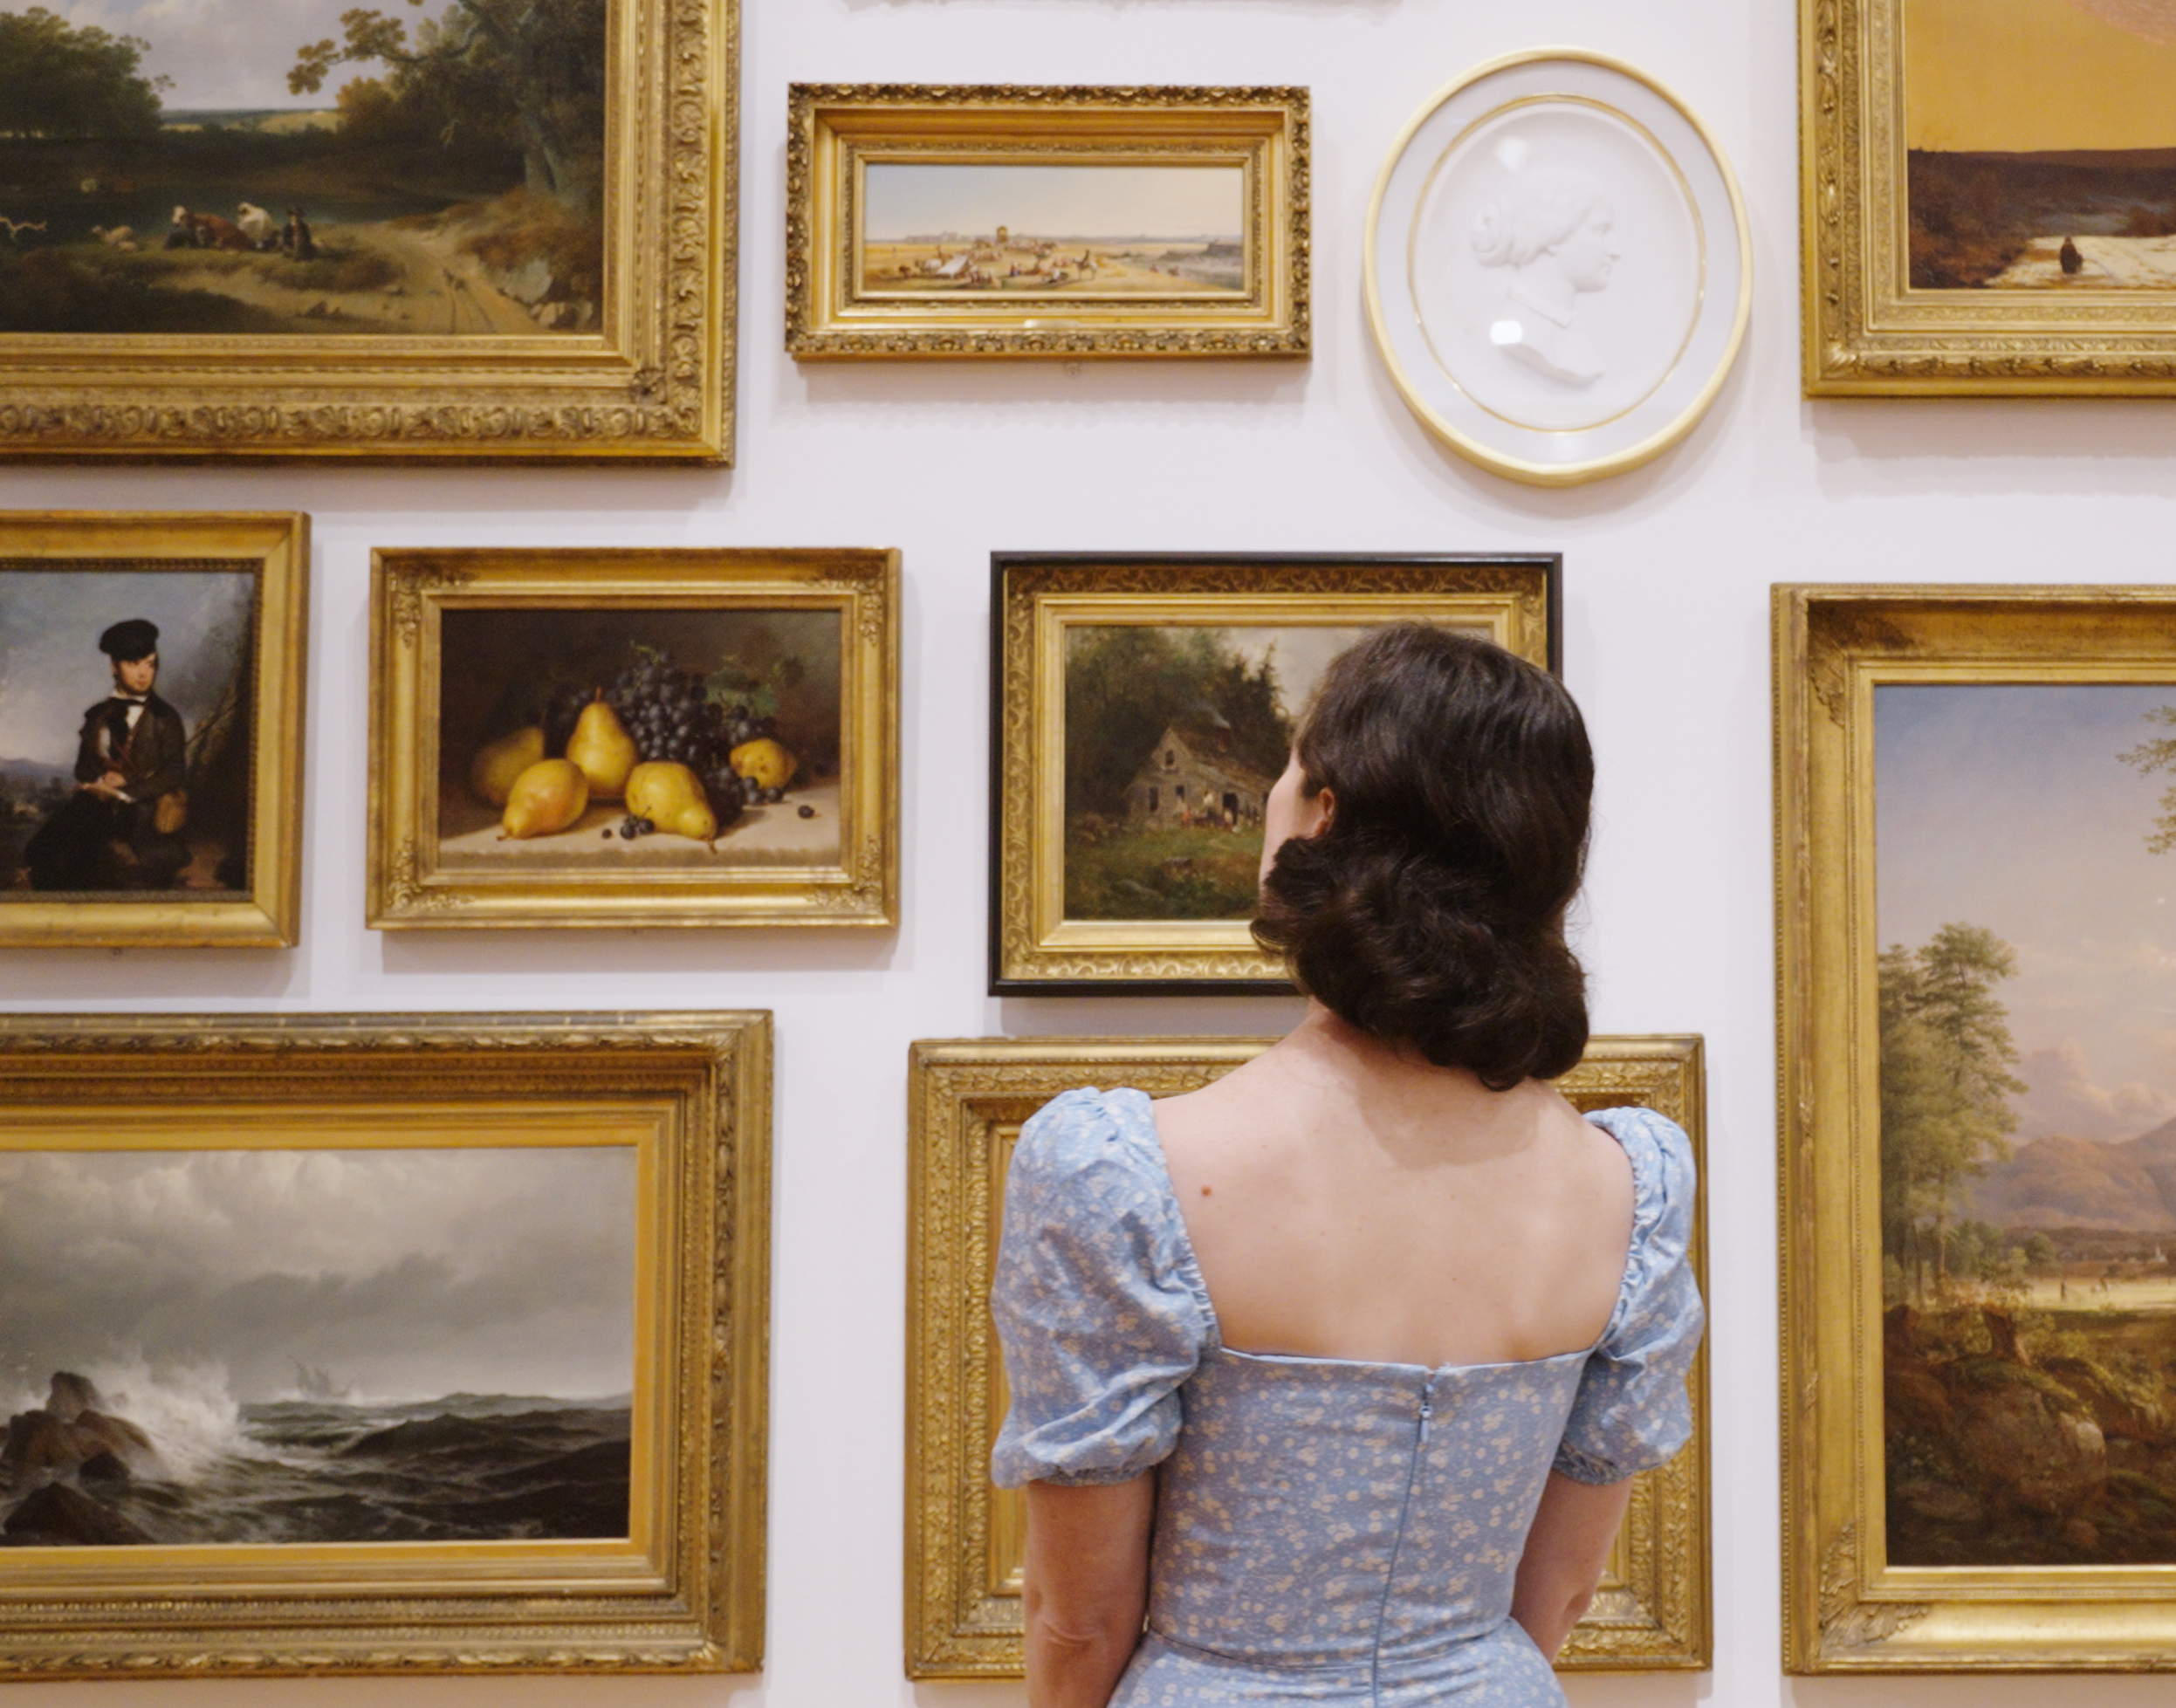 Woman in a blue dress with dark hair looks at a wall with American artworks hung in a salon style.